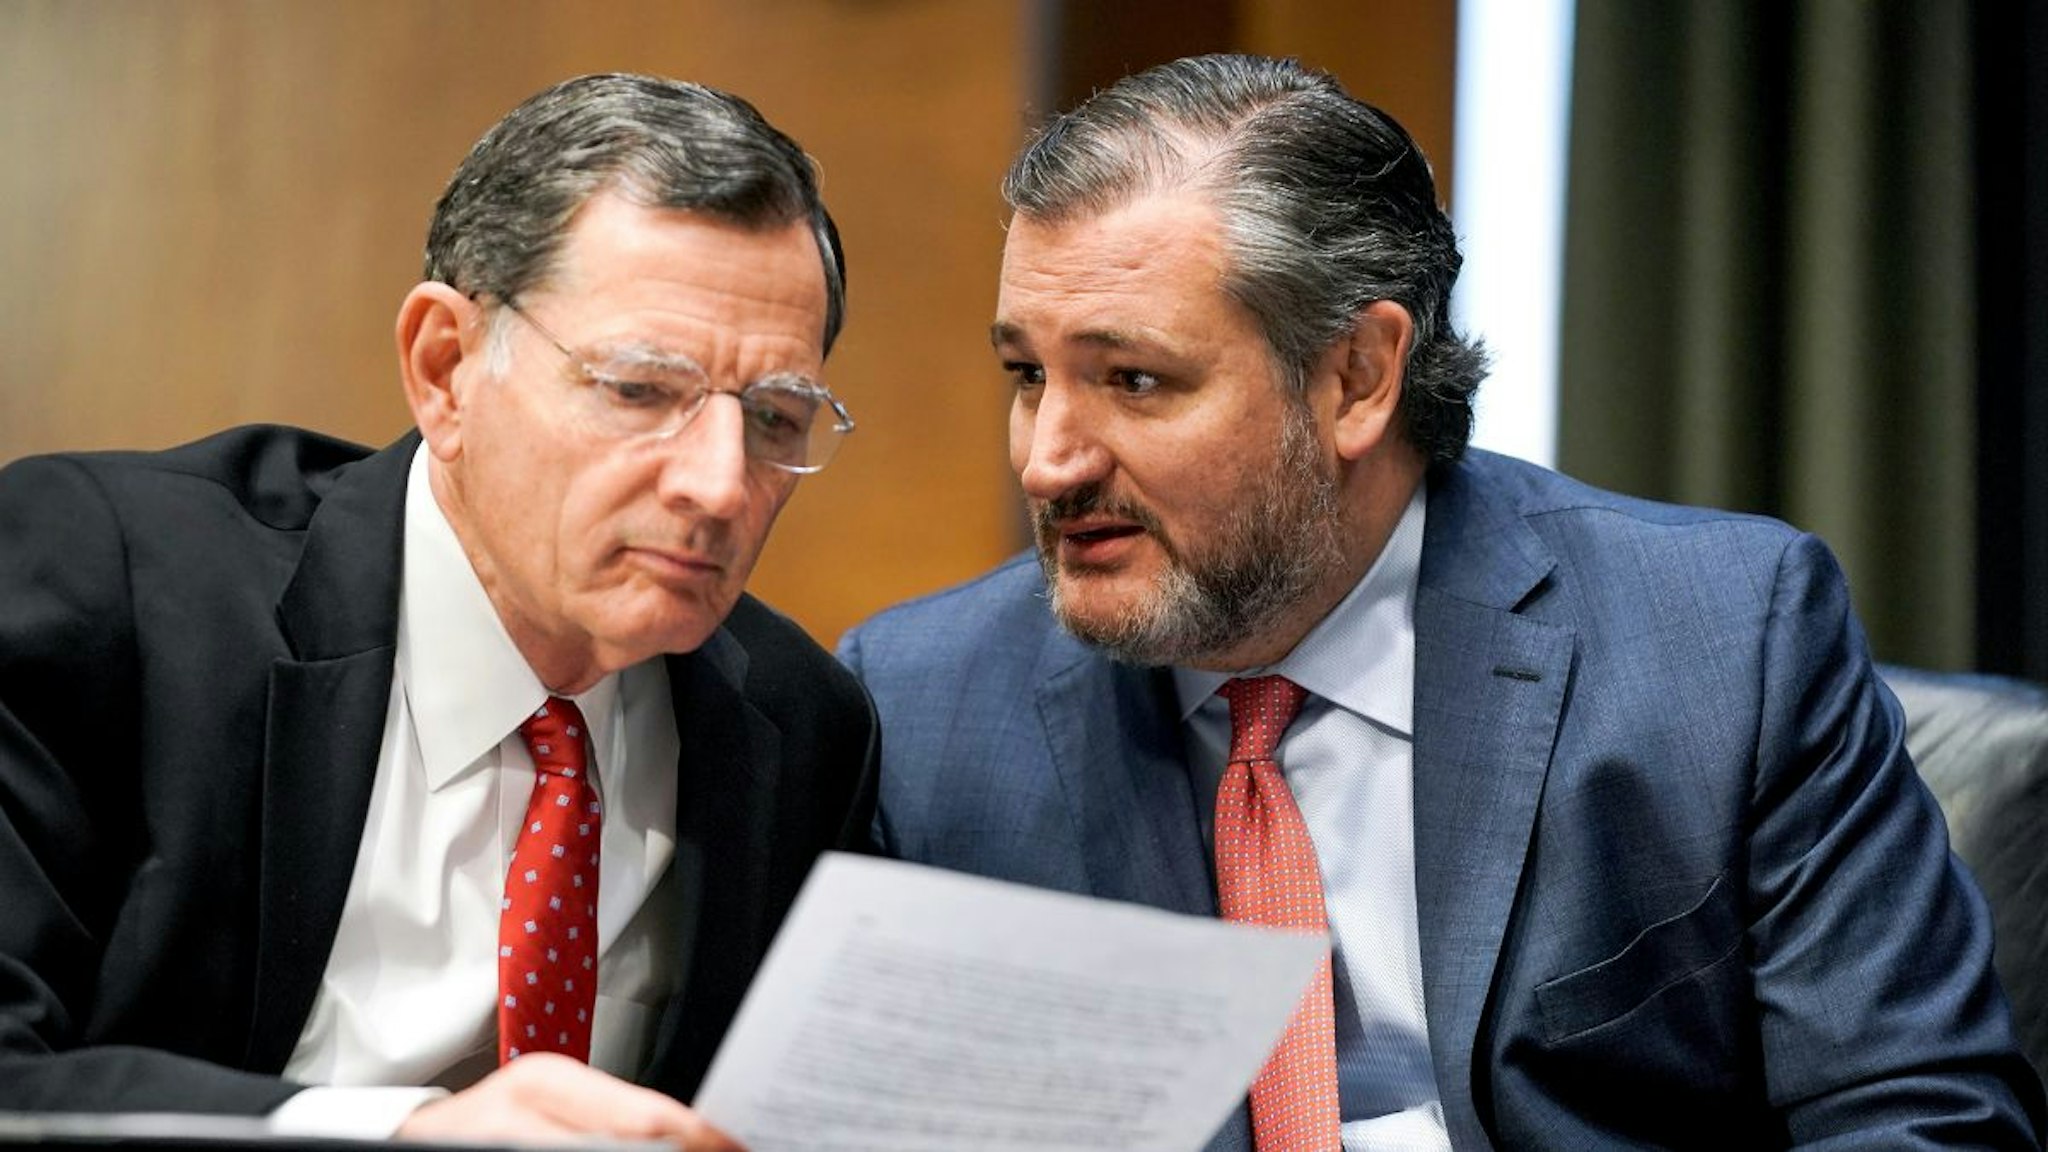 Sen. John Barrasso (R-WY) and Sen. Ted Cruz (R-TX) talk at the confirmation hearing for Samantha Power, nominee to be Administrator of the U.S. Agency for International Development, before the Senate Foreign Relations Committee on March 23, 2021 on Capitol Hill in Washington, DC.